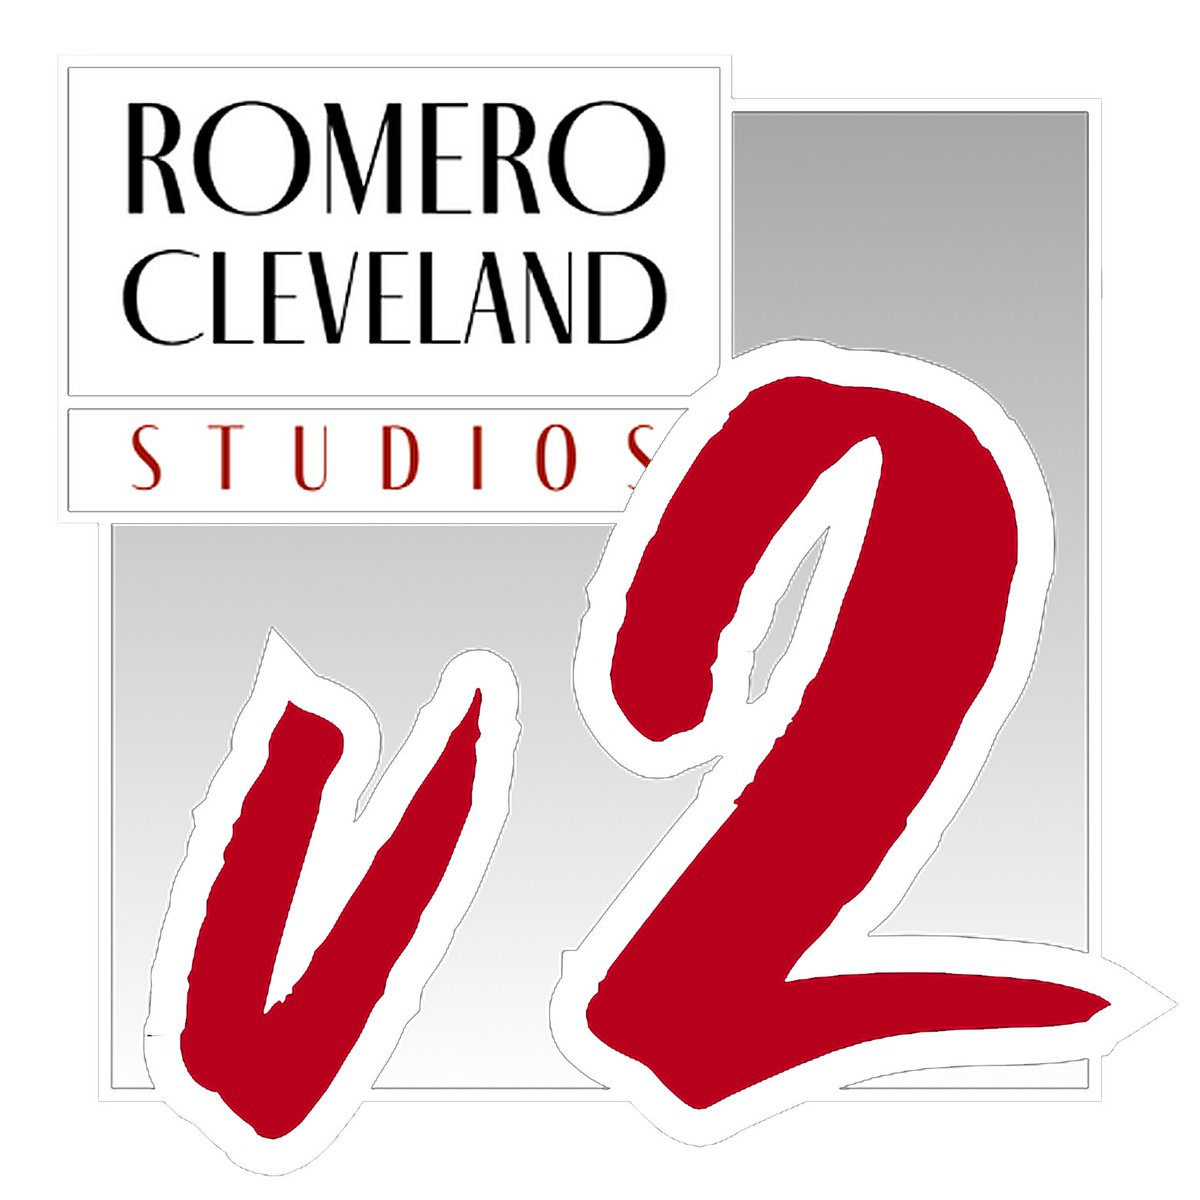 Hold onto your hats, Romero Cleveland Studios is getting an overhaul! New Branding, better content, and an aligned new vibe! Learn more @ creativeupst.art/v2-studio-remo…
#RCStudios216 #v2StudioRemodel #CustomCanvasQuotes #WallArt #HandmadeHomeDecor #Gifts #HolidayDecor #HomeDecorWallArt